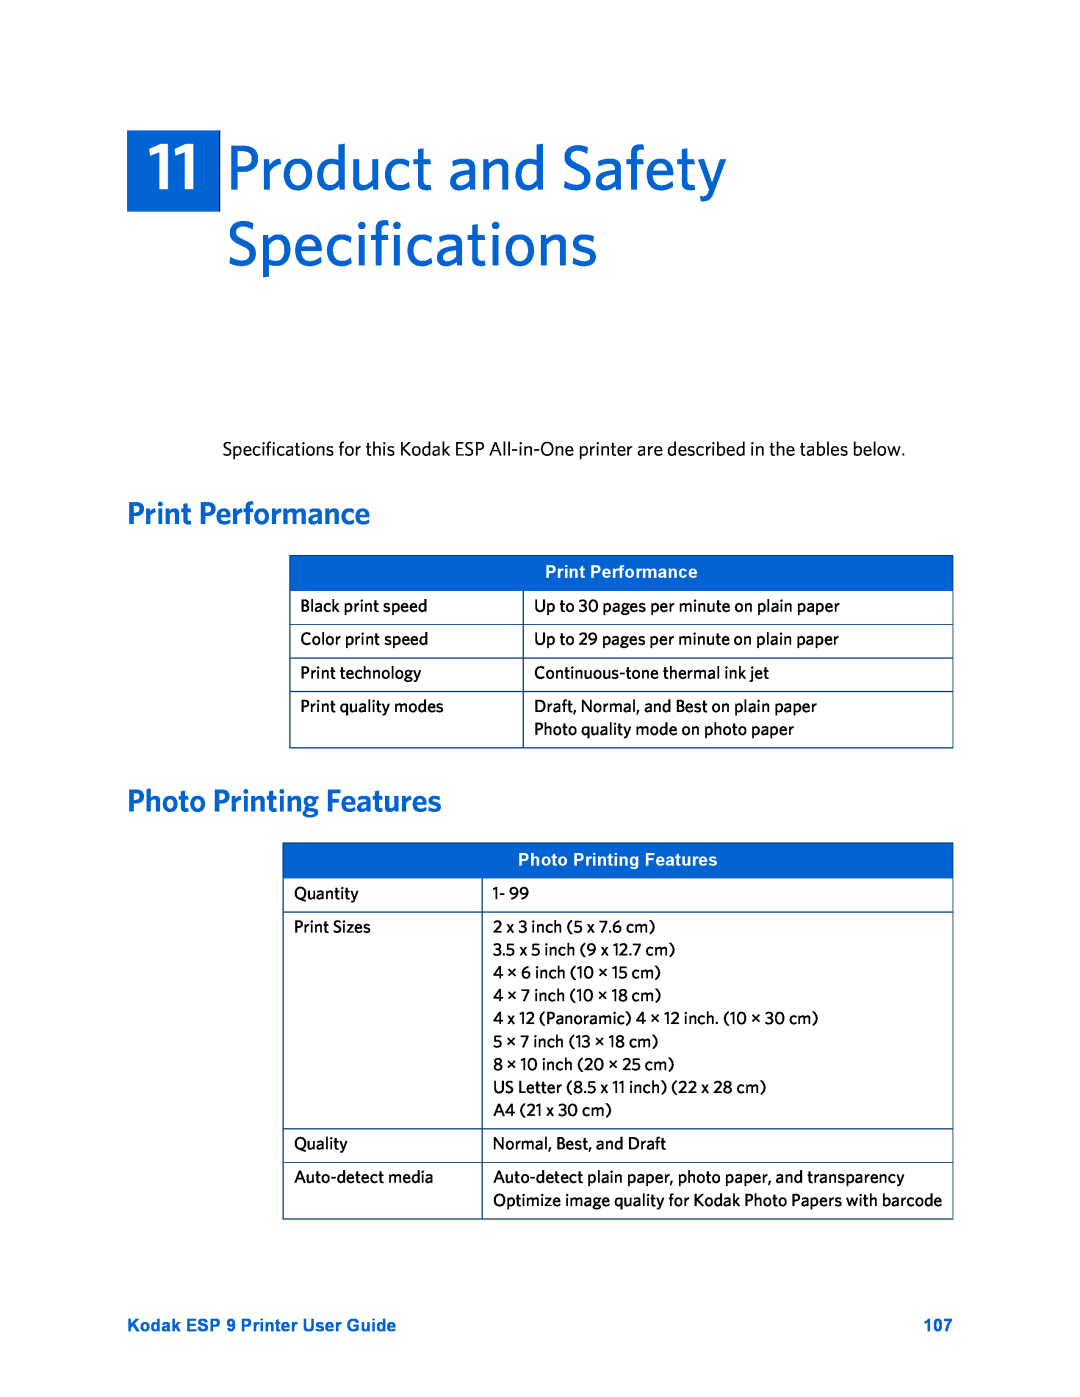 Kodak Product and Safety Specifications, Print Performance, Photo Printing Features, Kodak ESP 9 Printer User Guide 